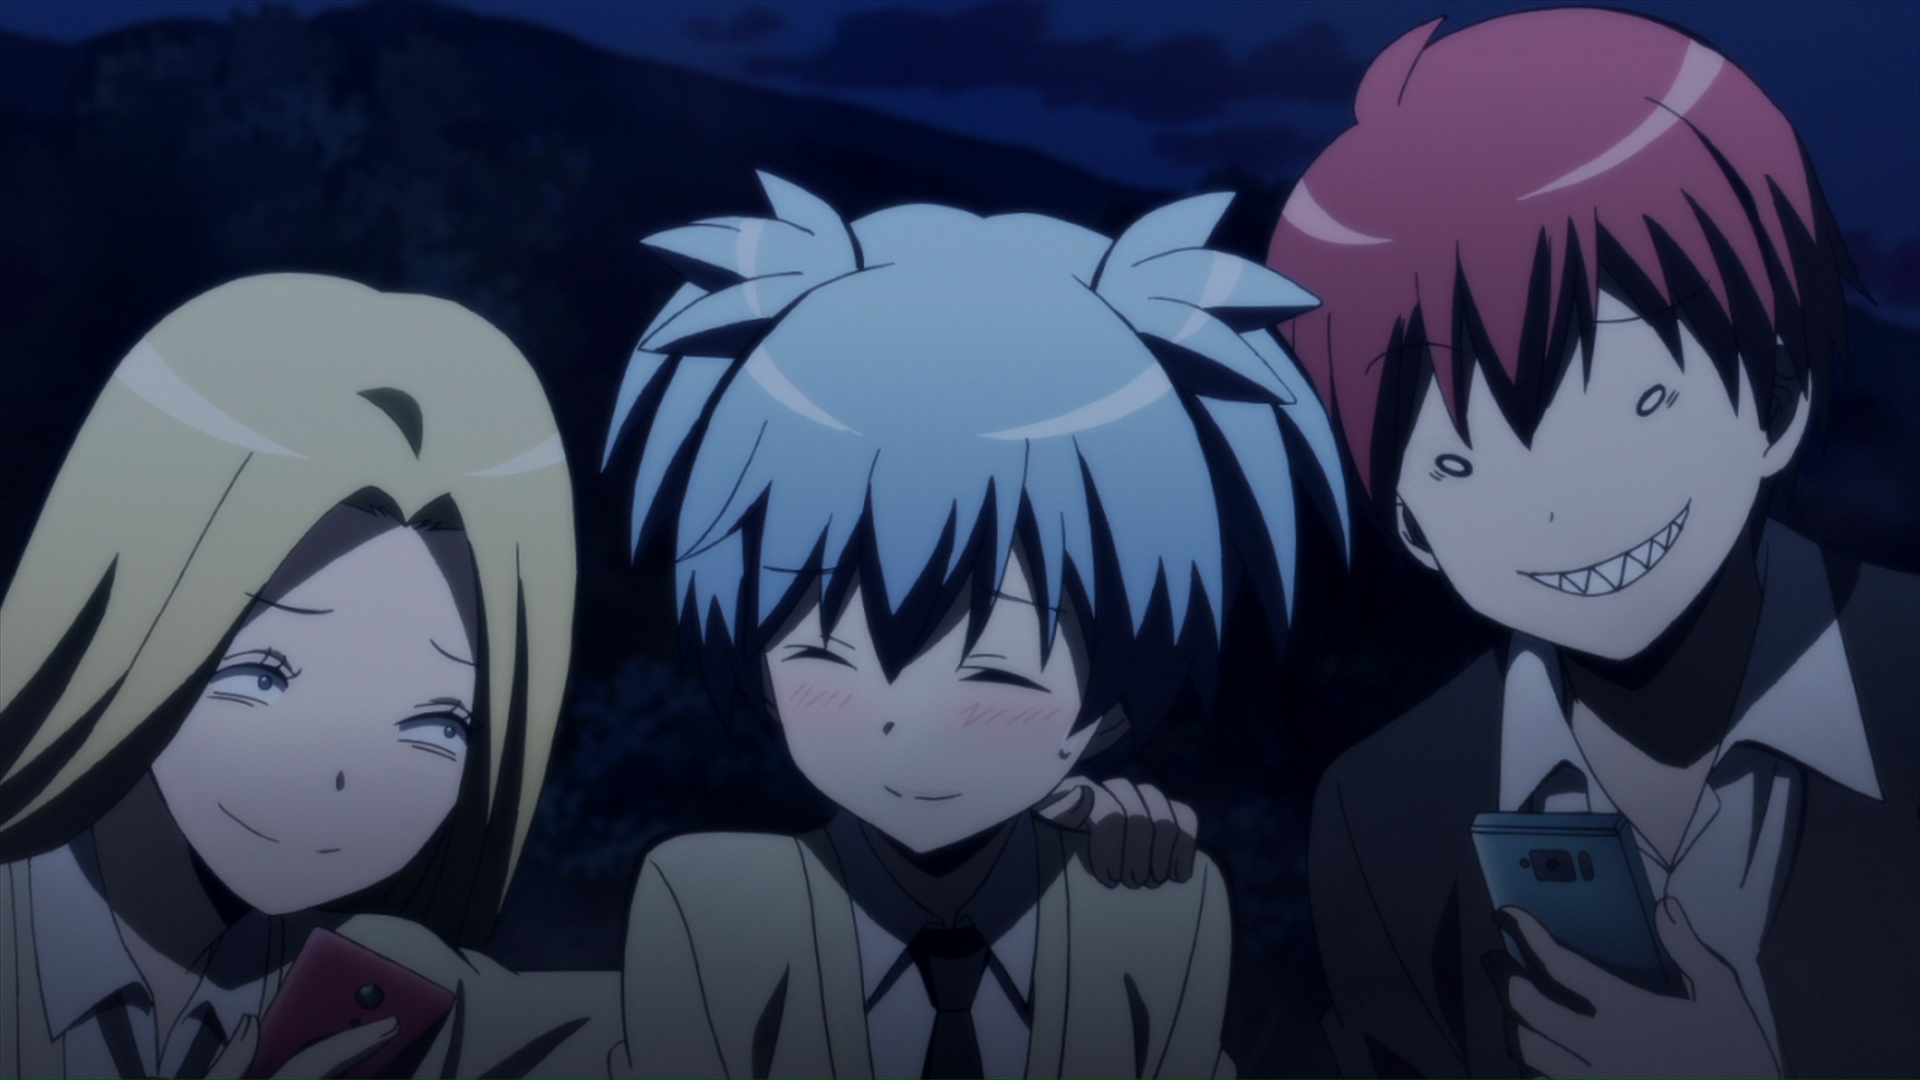 Review of Assassination Classroom